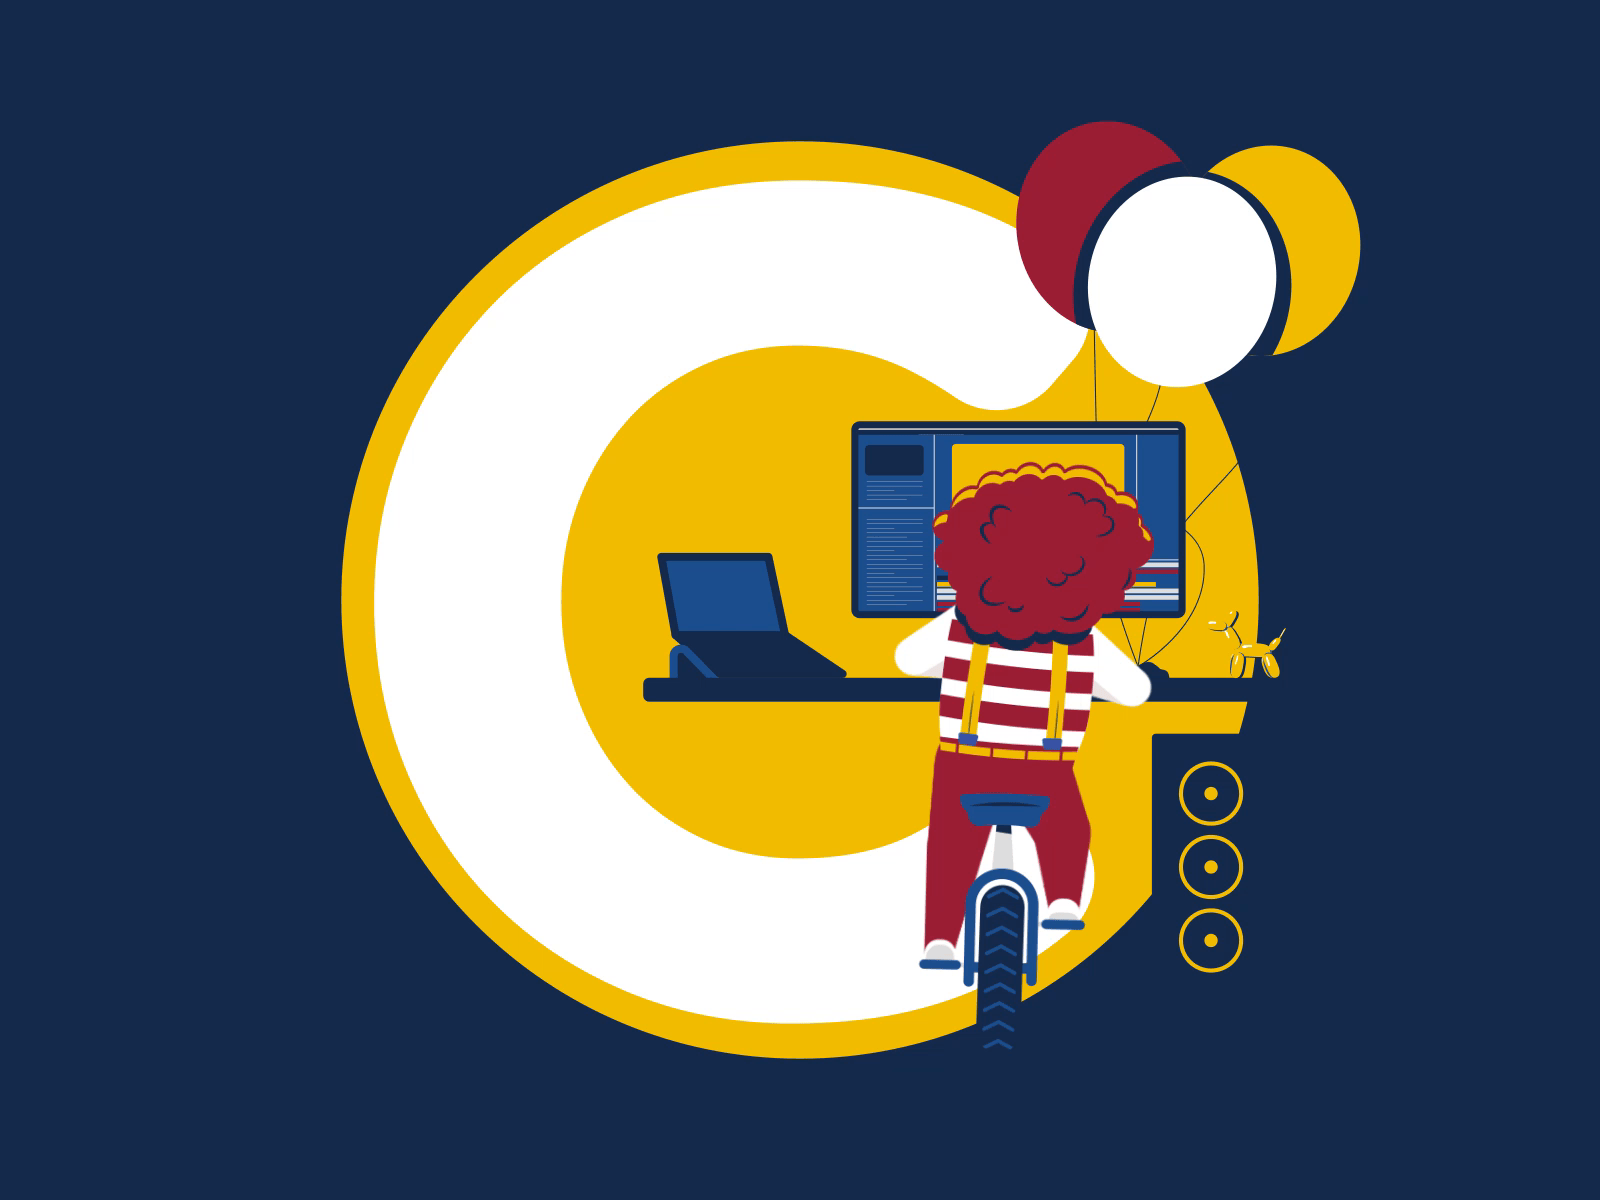 C is for Clown 🤡